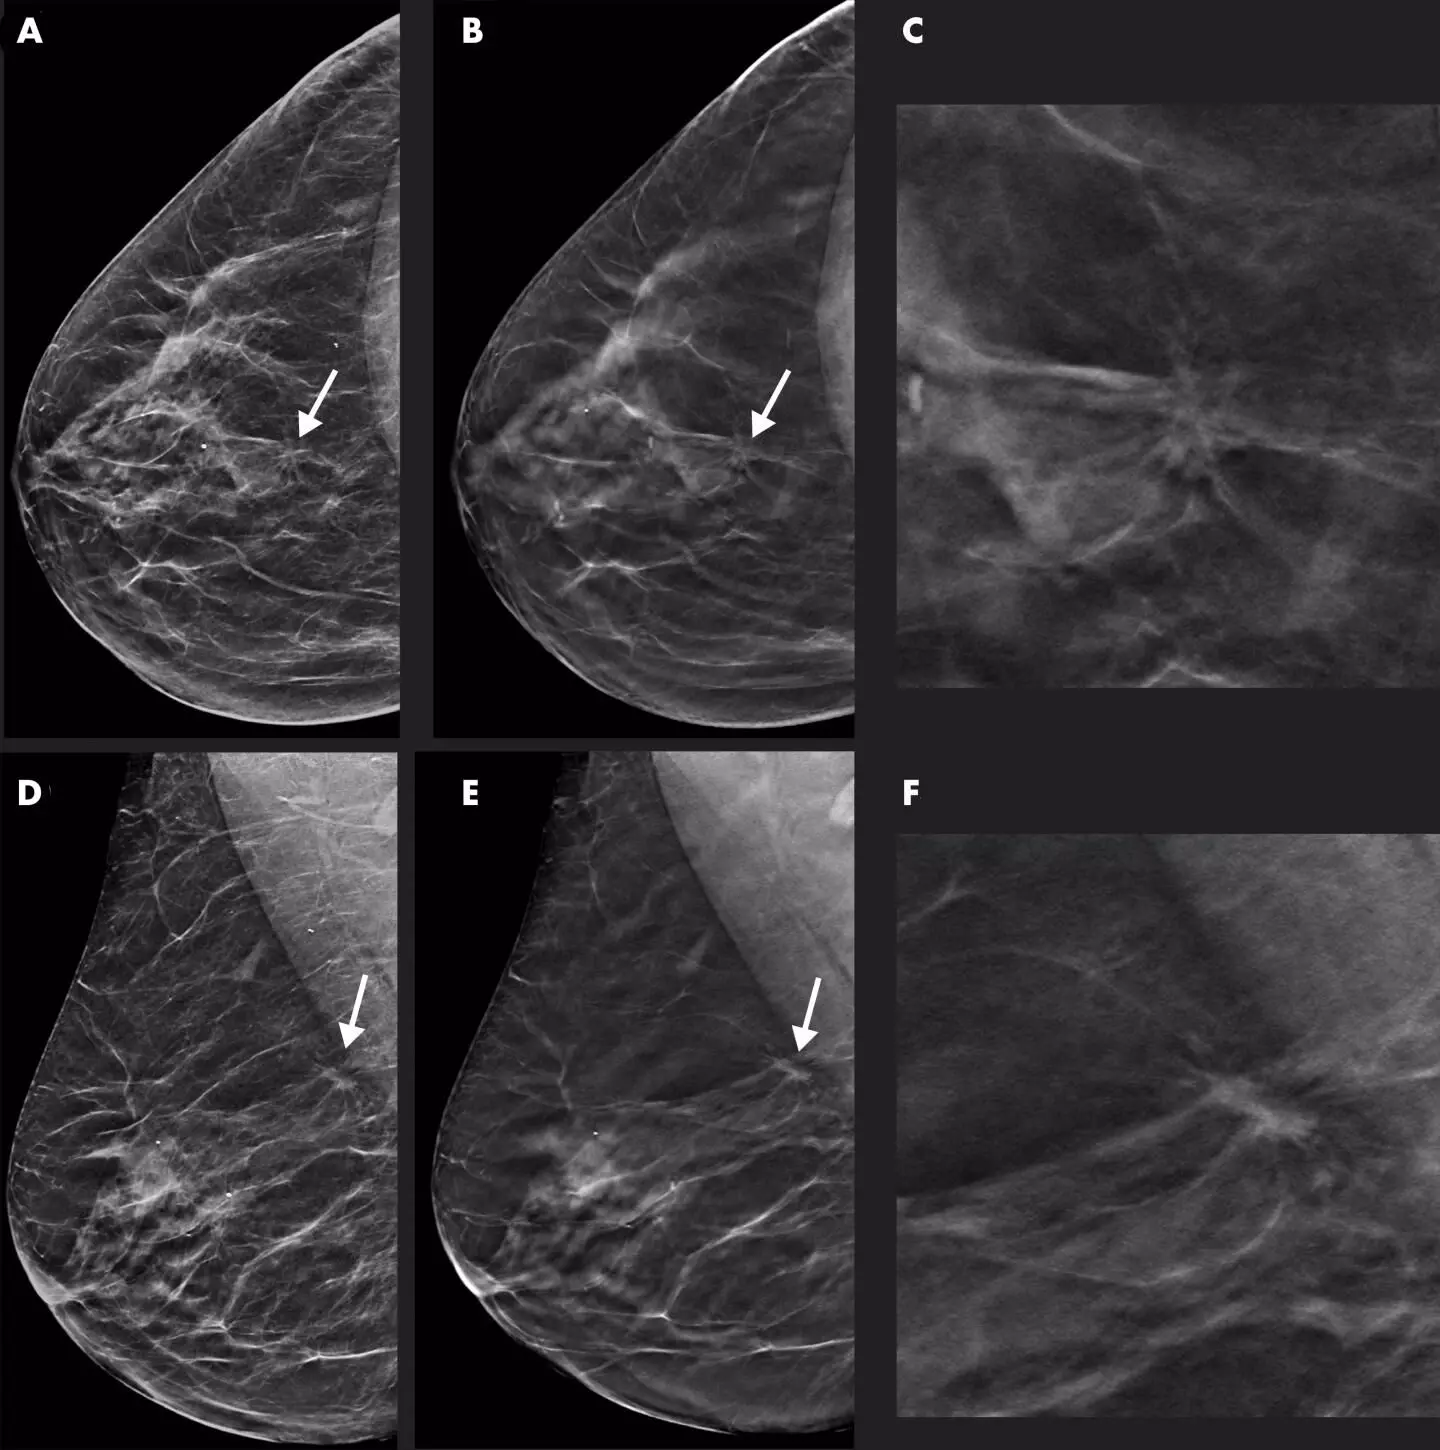 Digital breast tomosynthesis improves invasive cancer detection